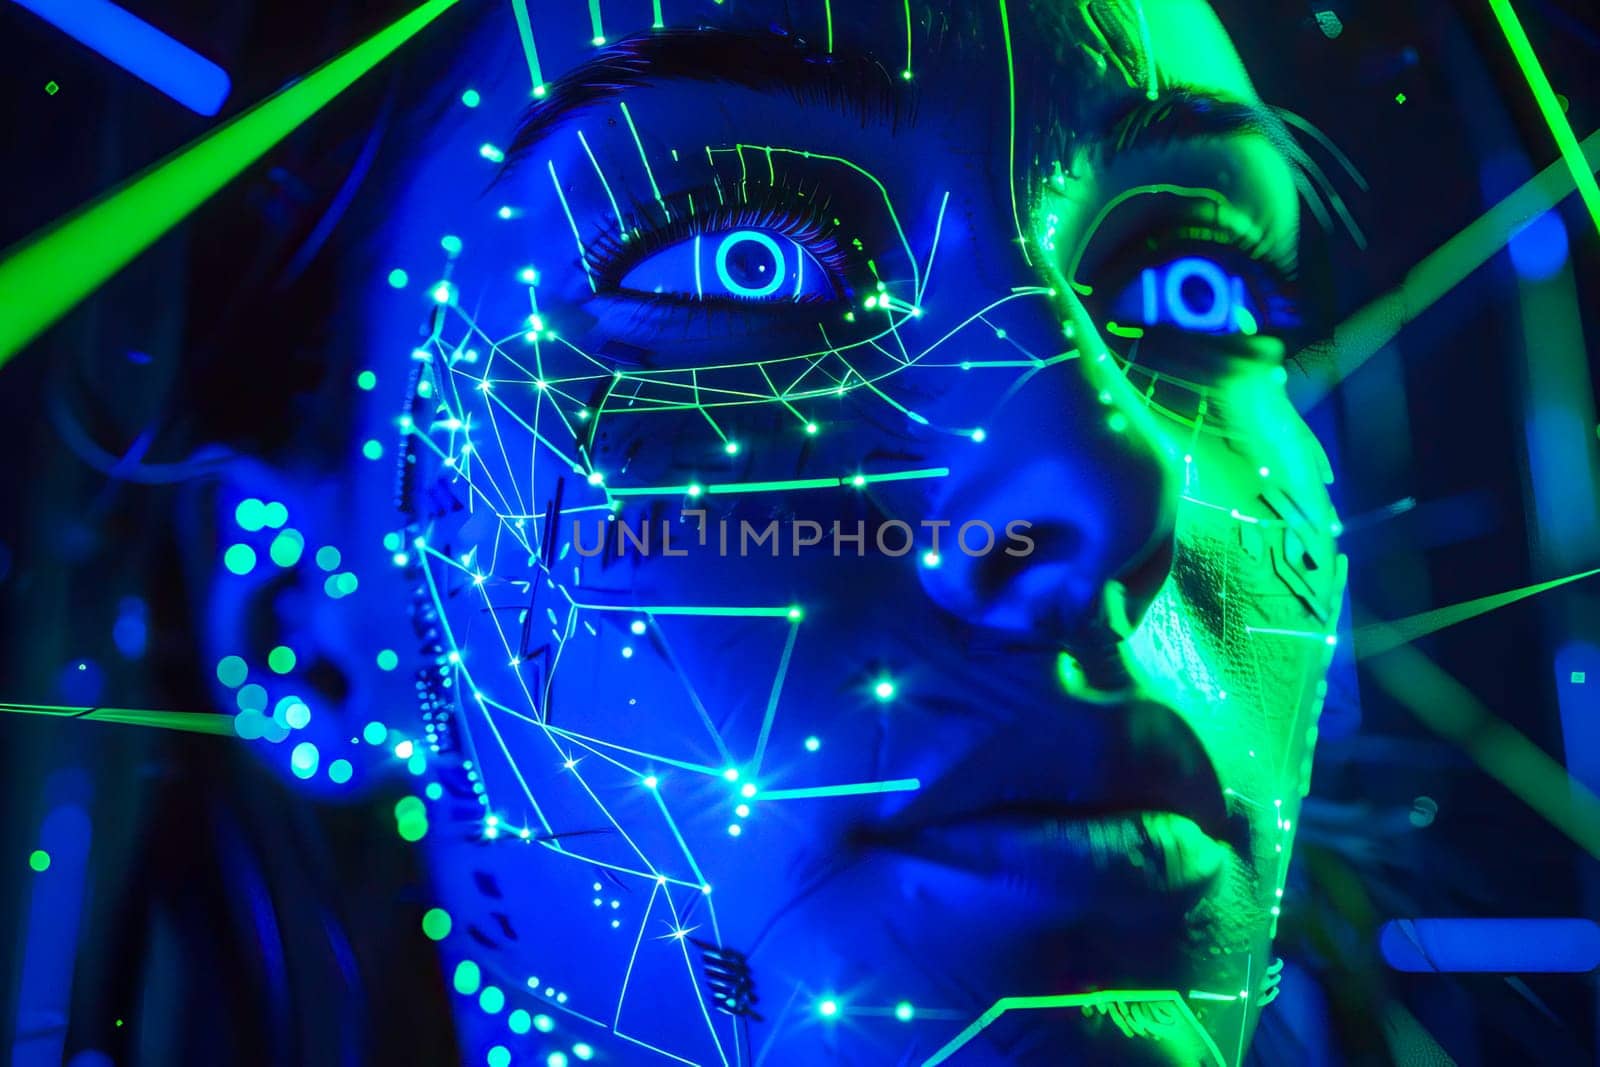 A womans face is highlighted by vibrant neon lights, creating a striking visual contrast.